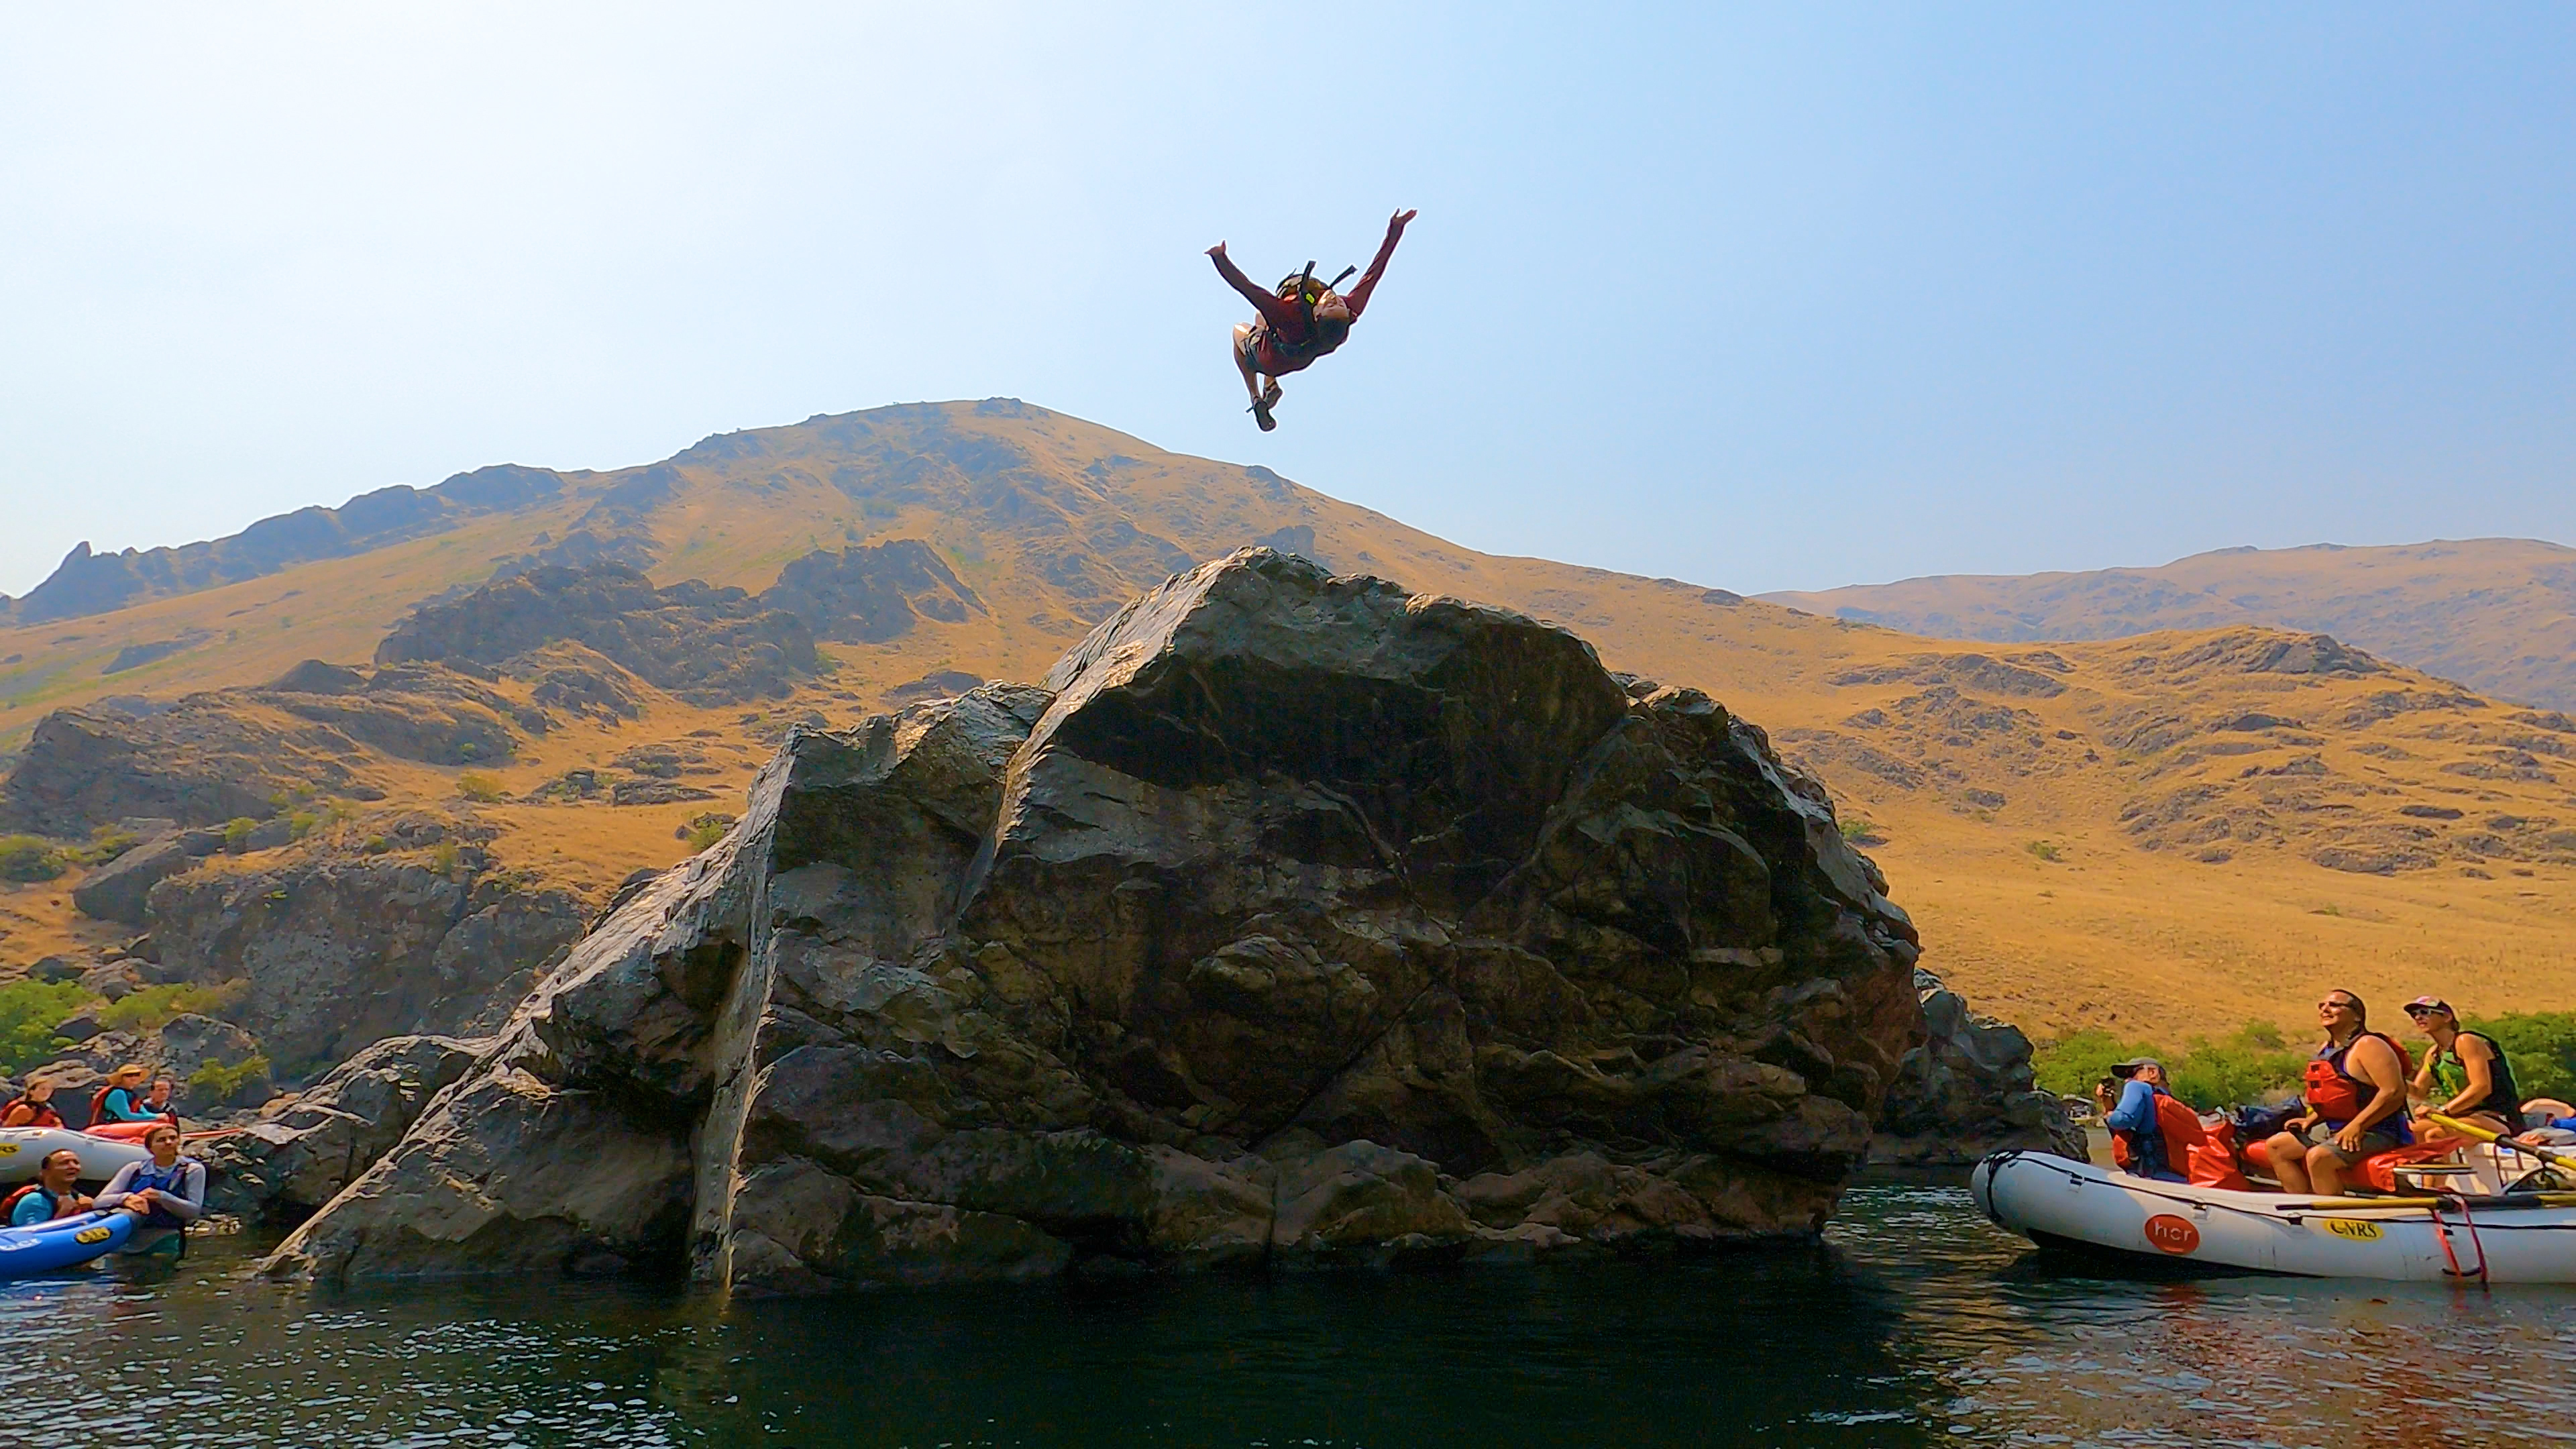 Cliff Jumper at the Snake River